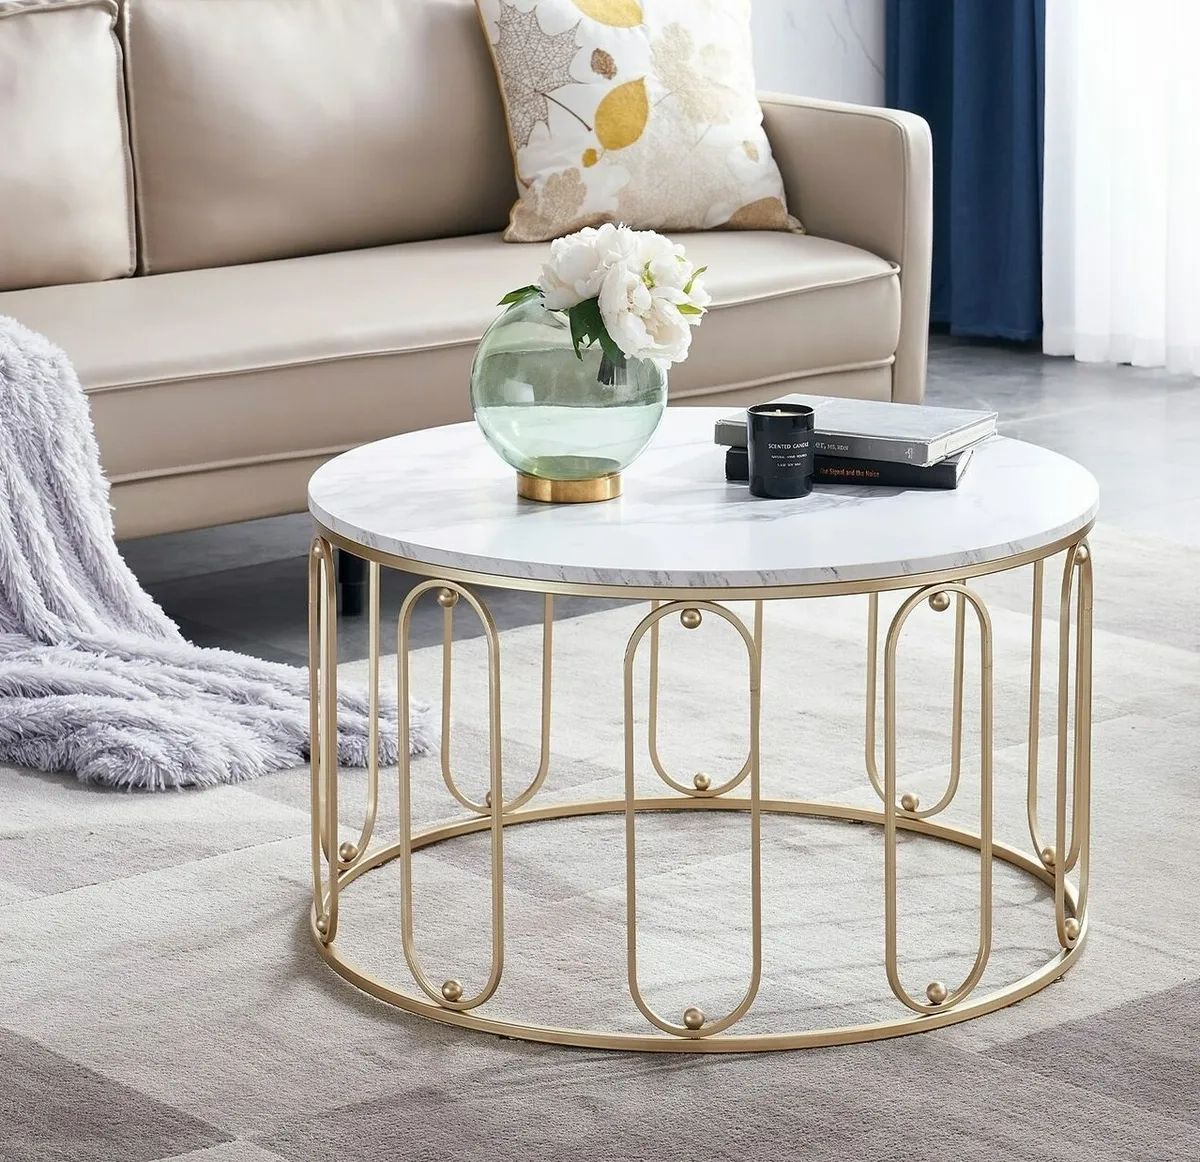 Ivinta Modern Nesting Coffee Table, Home Round Cocktail Table With Metal  Frame | Ebay With Regard To Modern Nesting Coffee Tables (Photo 3 of 15)